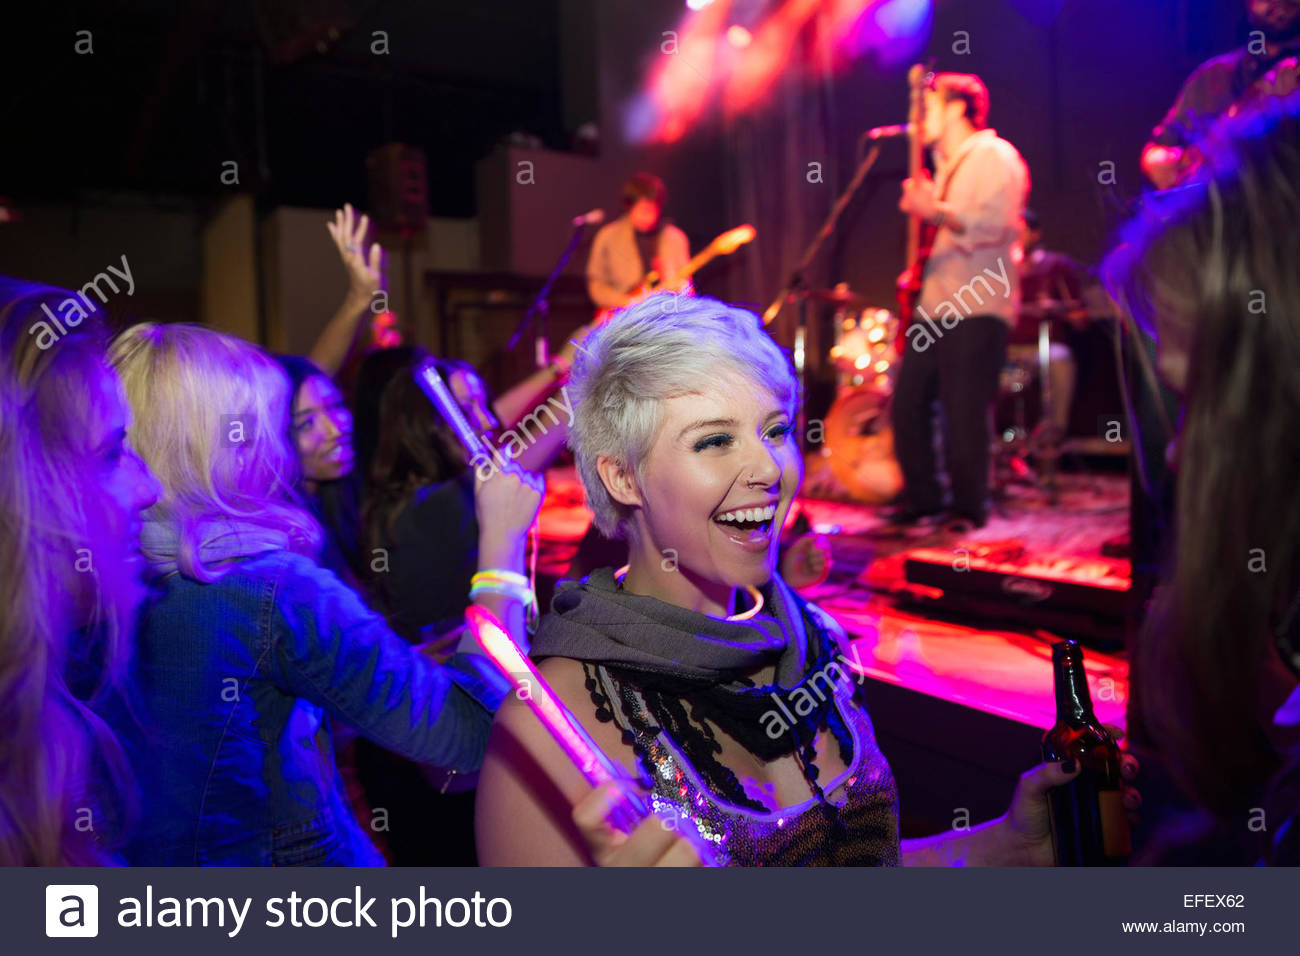 Enthusiastic women in crowd at music concert Stock Photo